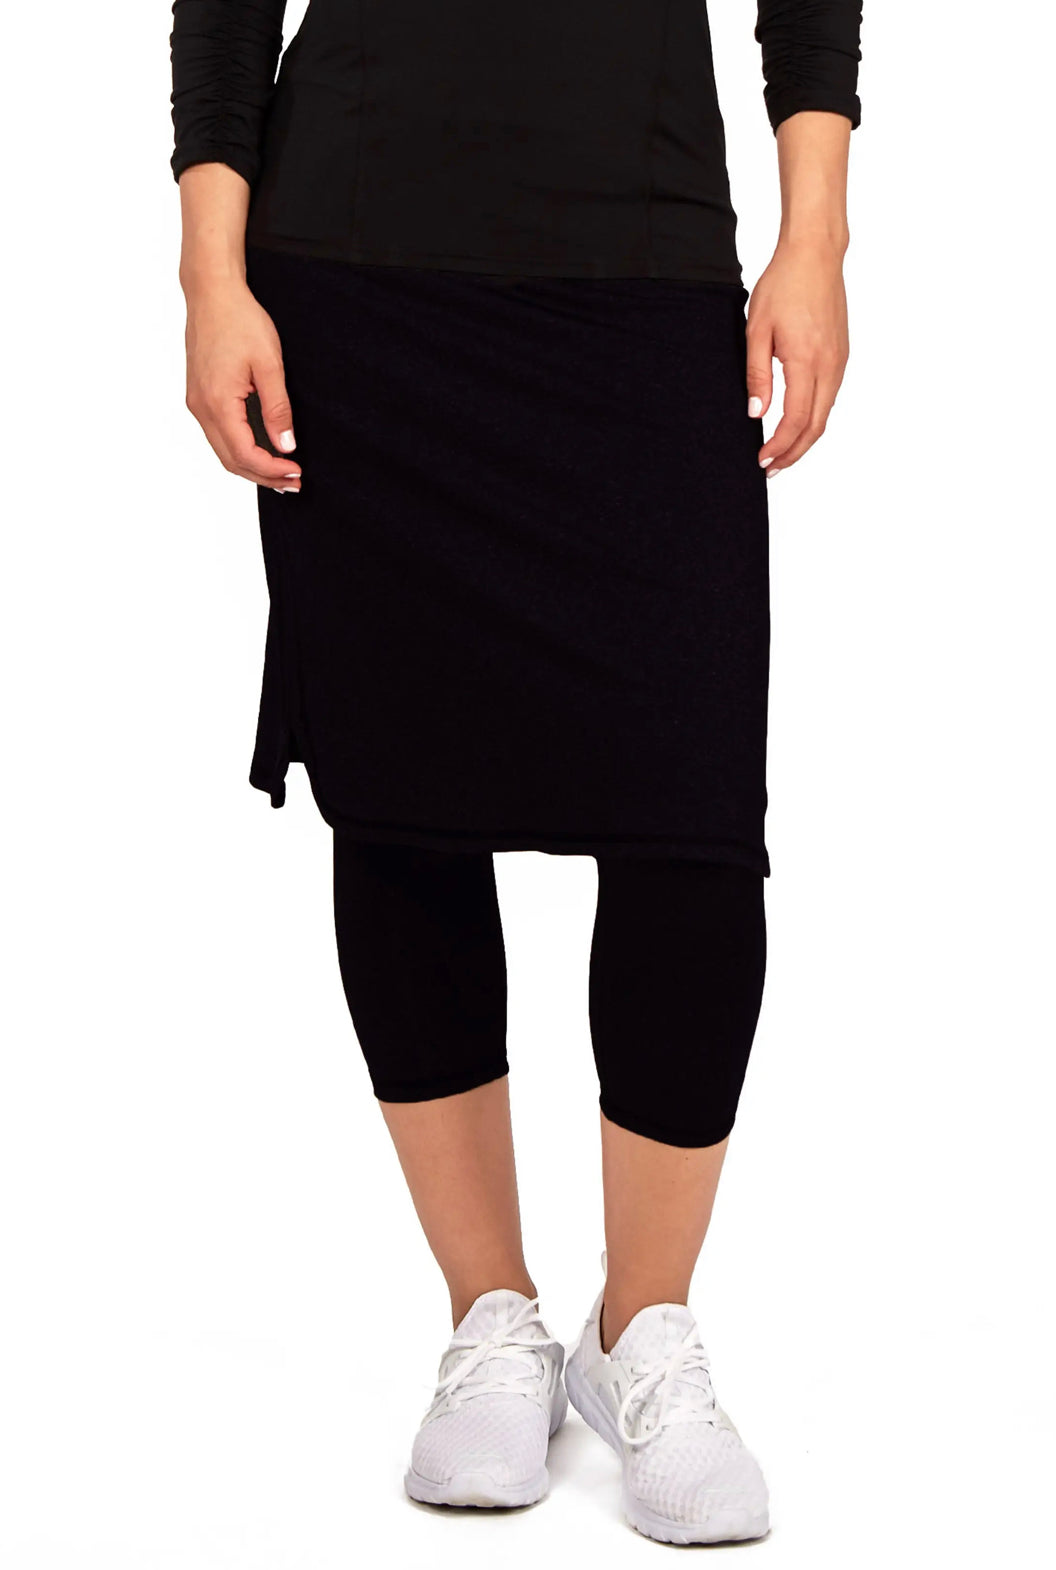 Bamboo Active Skirt Leggings | by Bamboutique